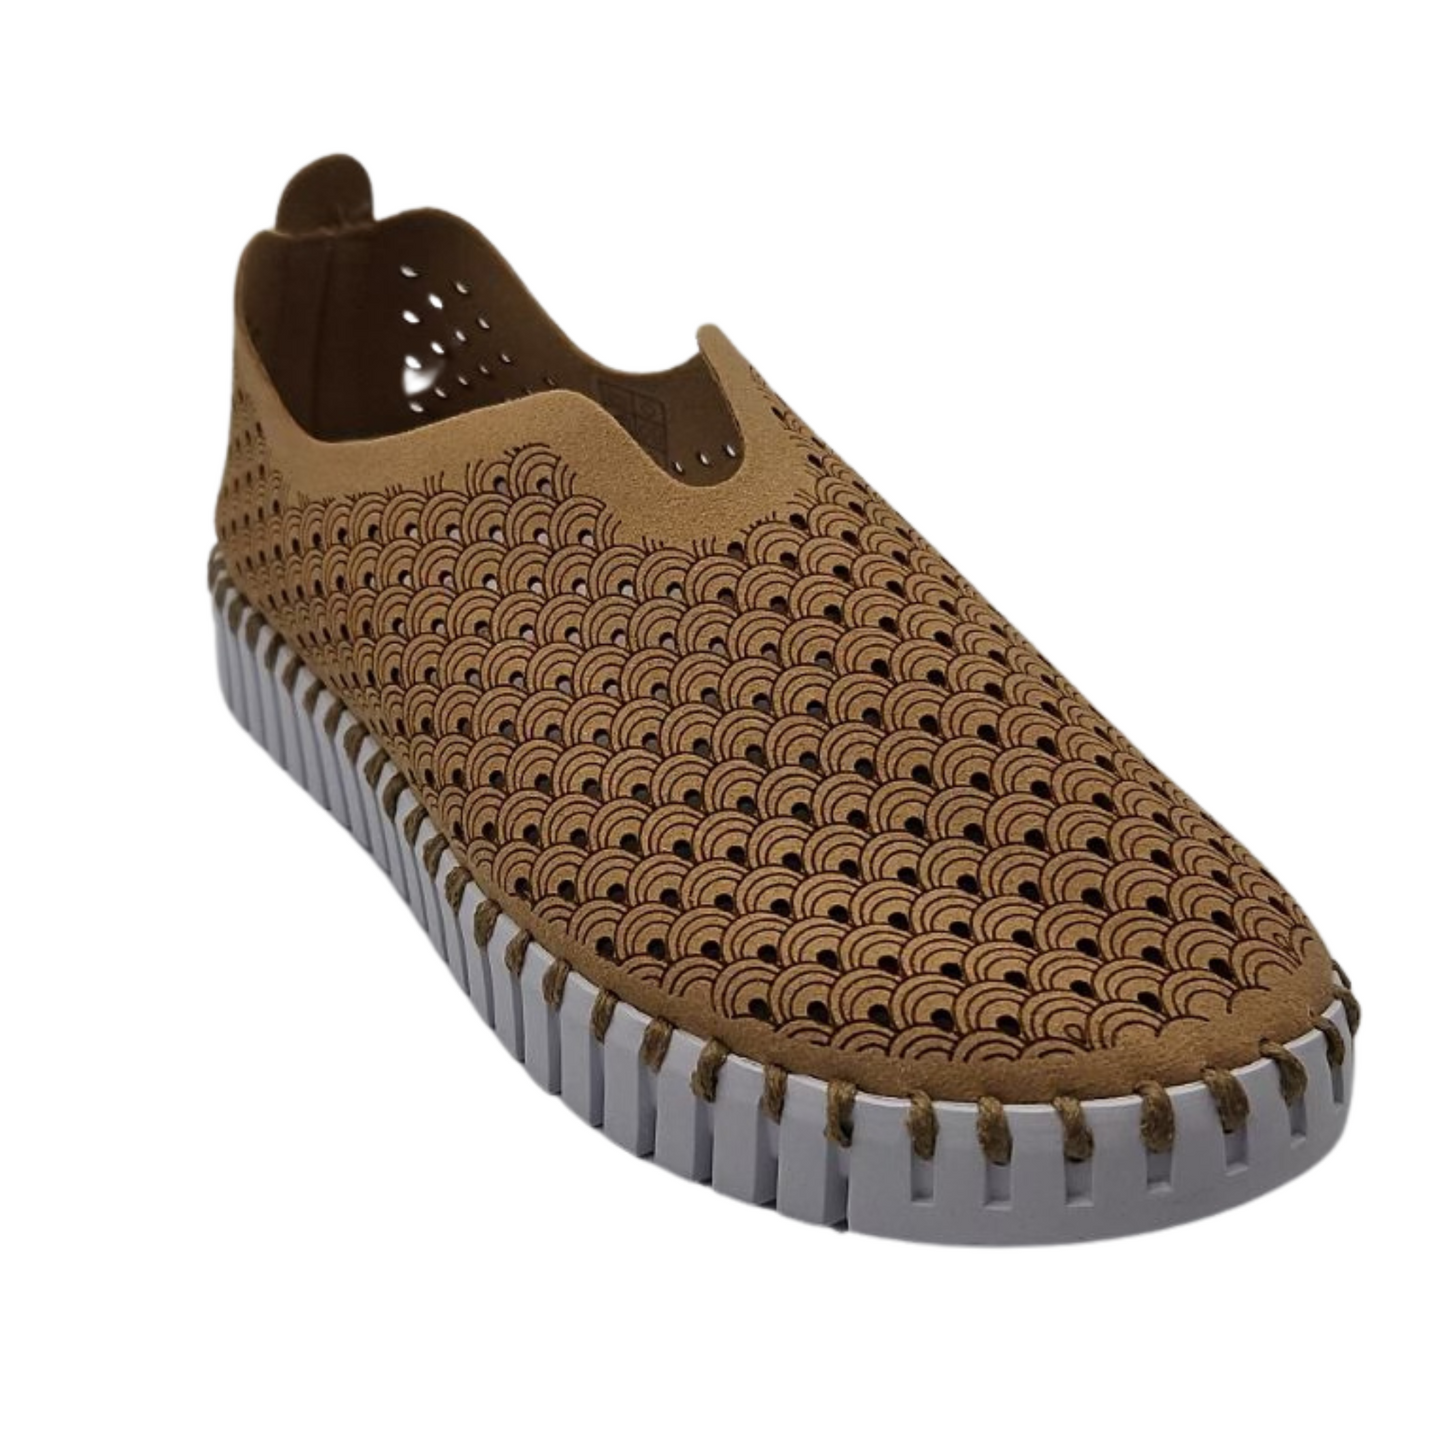 45 degree angled view of latte mesh shoe with white rubber outsole